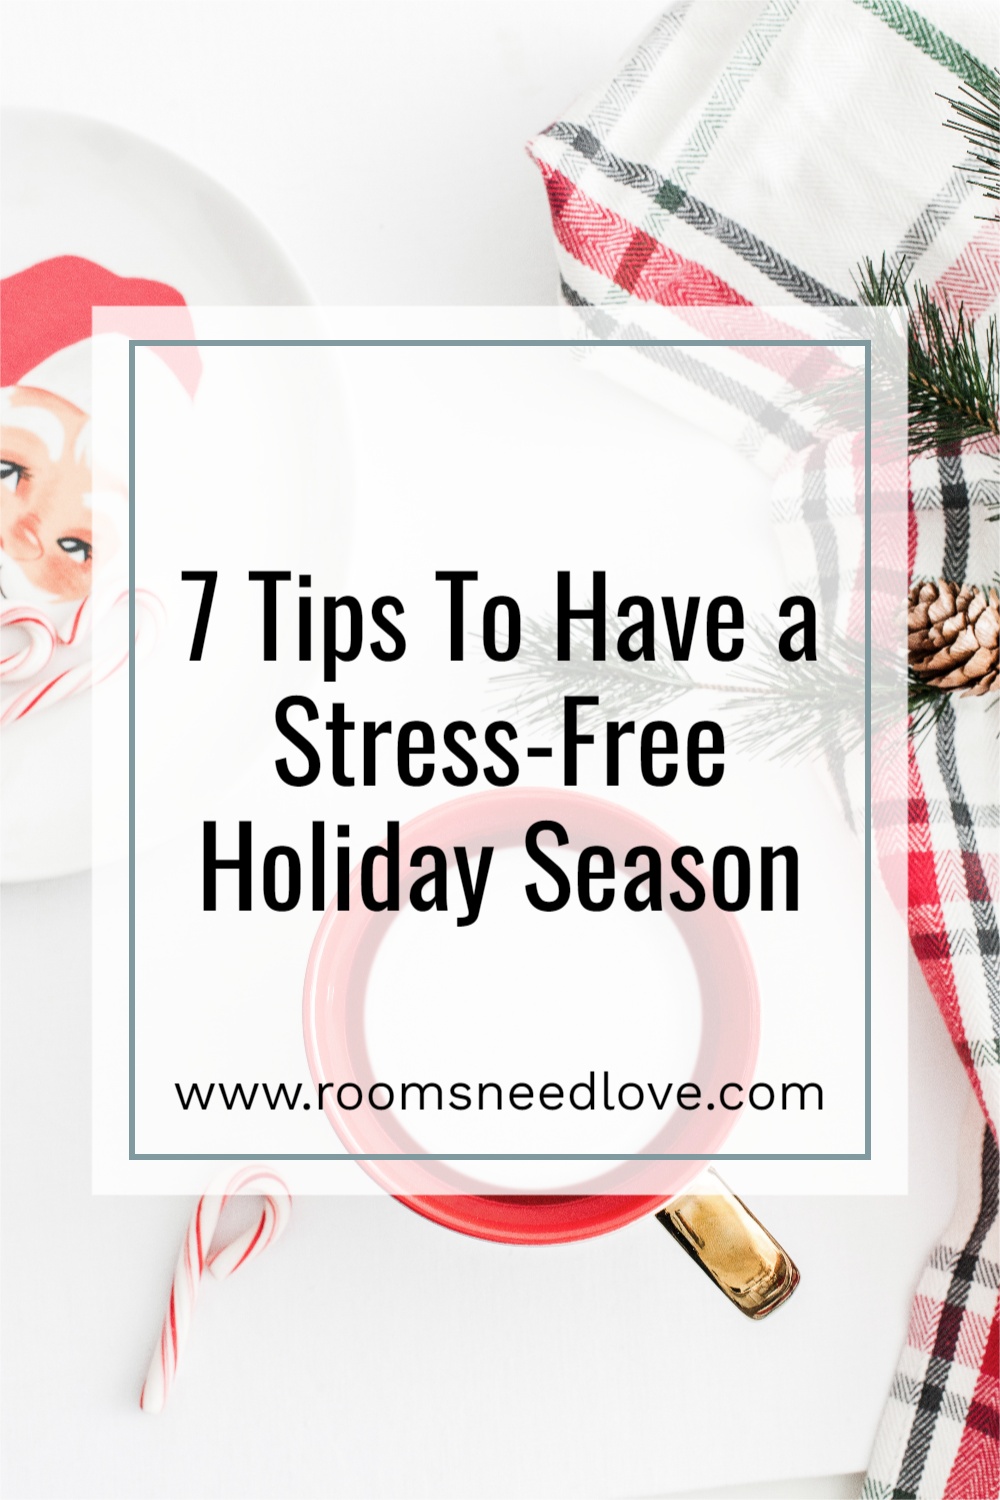 How can you stay stress-free during the holidays? Here are 7 simple tips for cutting out anxiety and having a stress-free holiday.